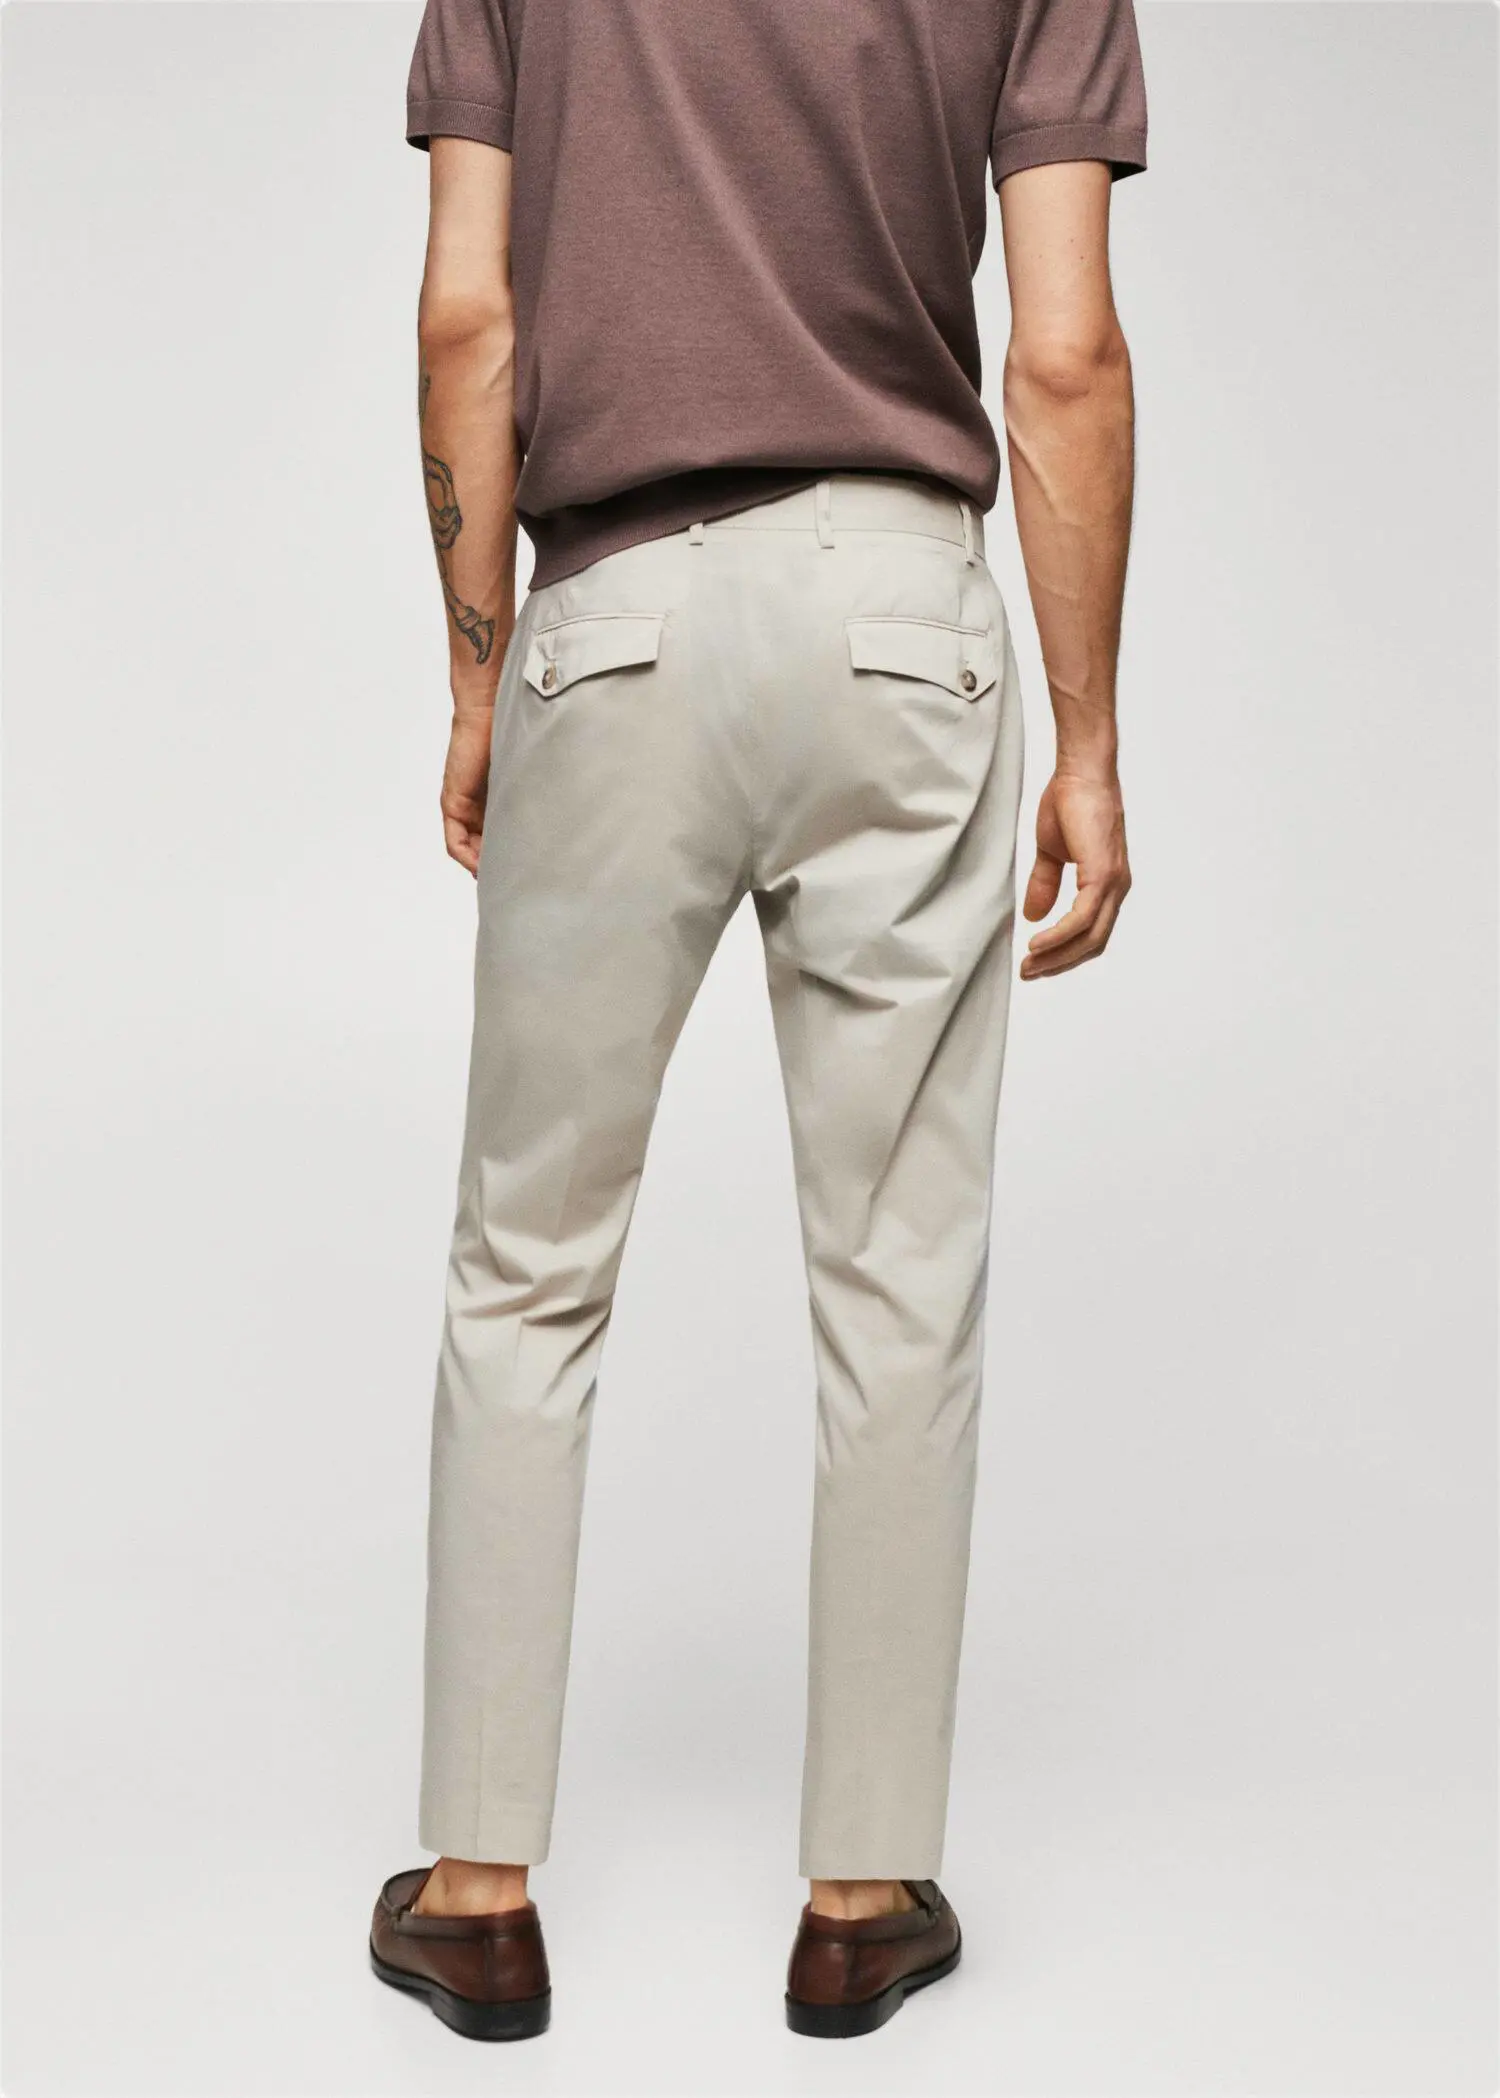 Mango Lightweight cotton pants. a man wearing a brown t-shirt and a pair of white pants. 